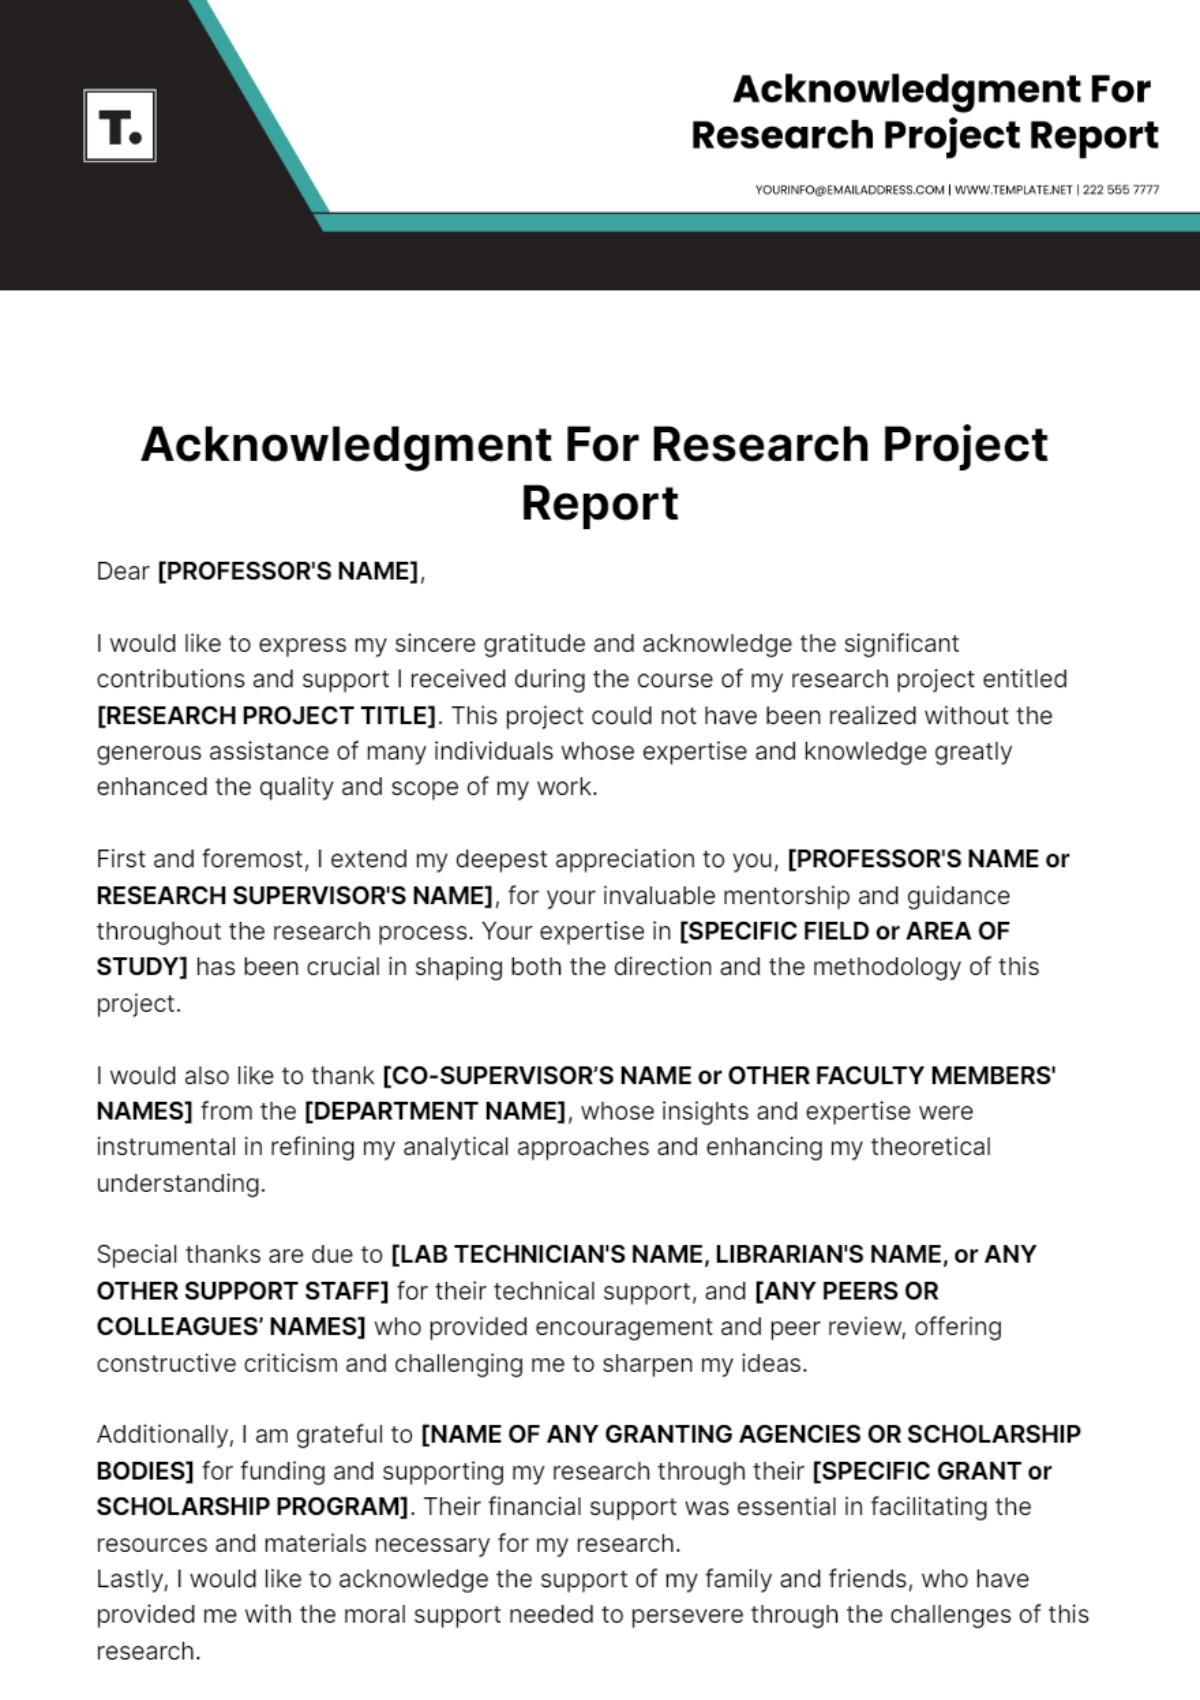 Acknowledgment For Research Project Report Template